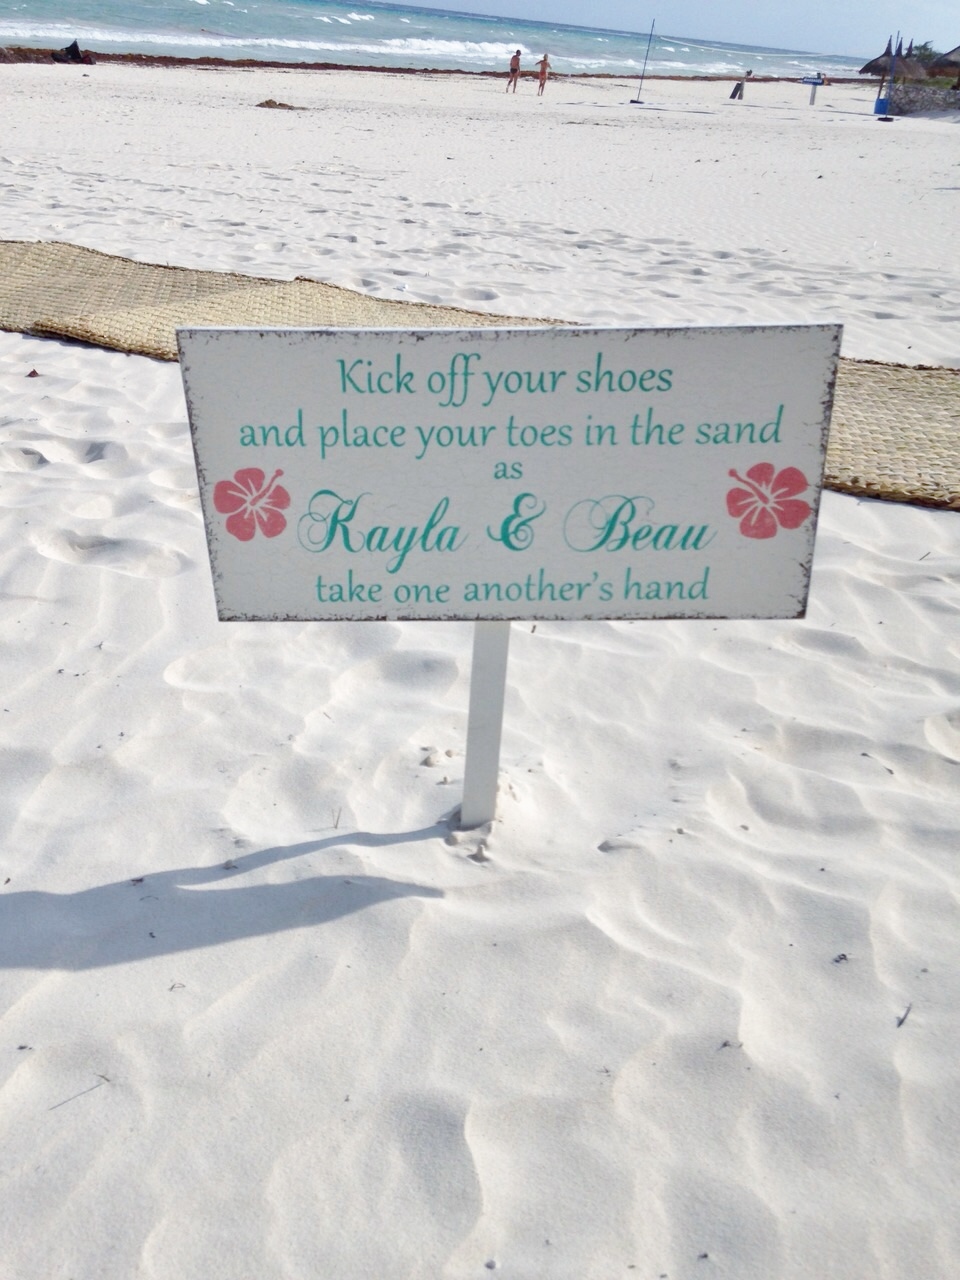 https://www.etsy.com/listing/189062575/beach-wedding-sign-names-hibiscus?ref=shop_home_active_15